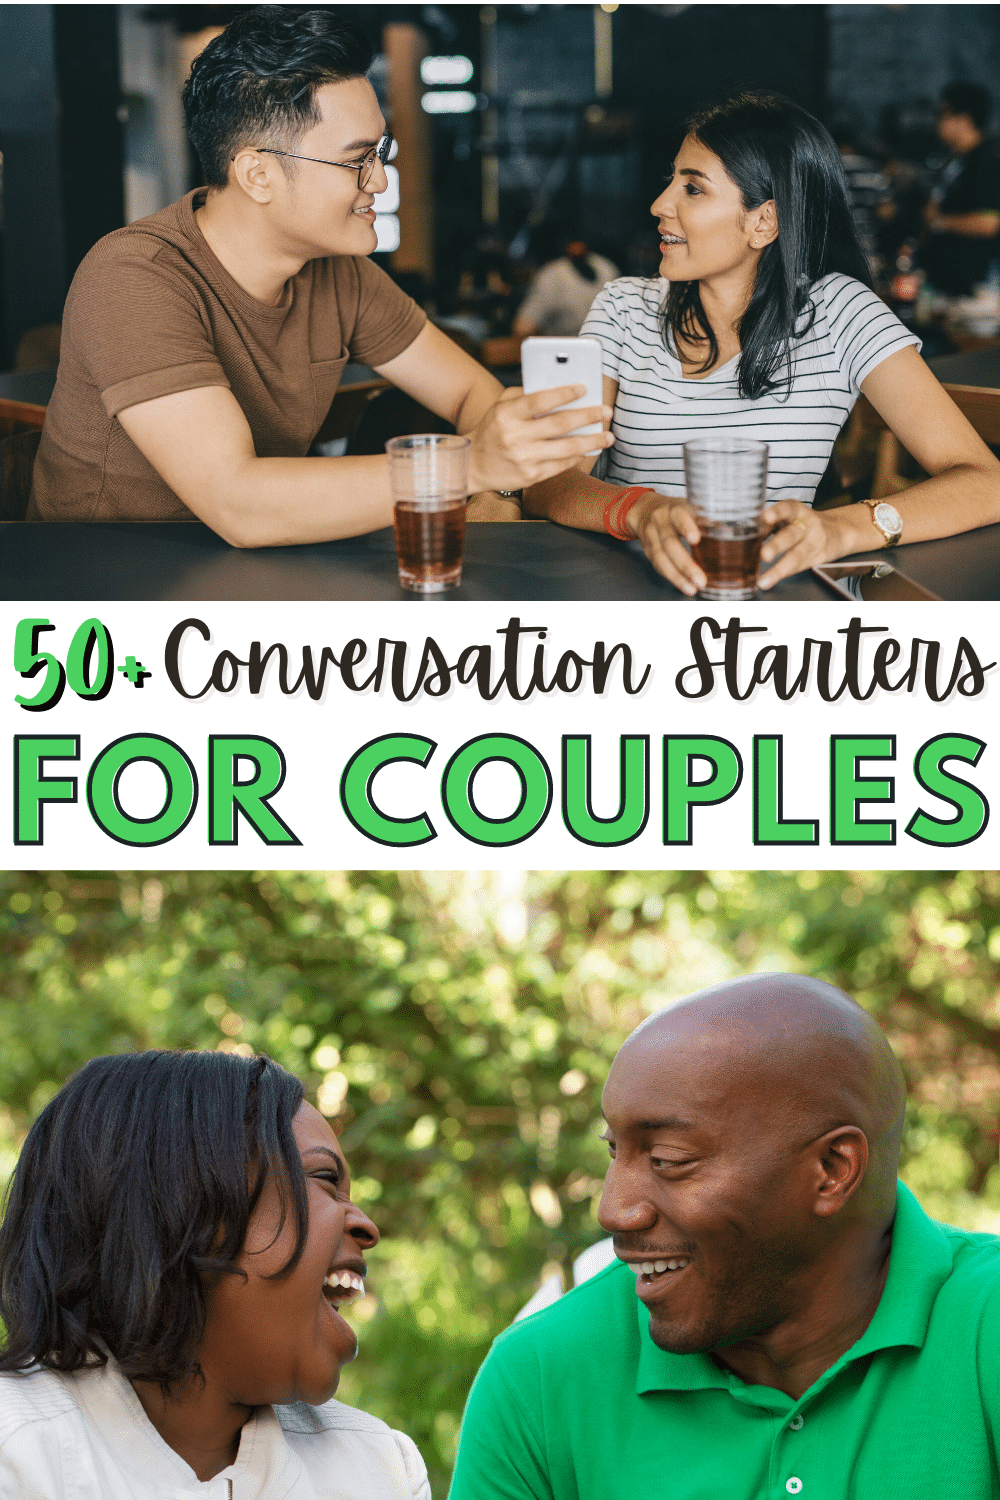 If you want to improve the communication between you and your significant other, try one of these conversation starters for couples. #marriage #marriageadvice #relationships #communication via @wondermomwannab